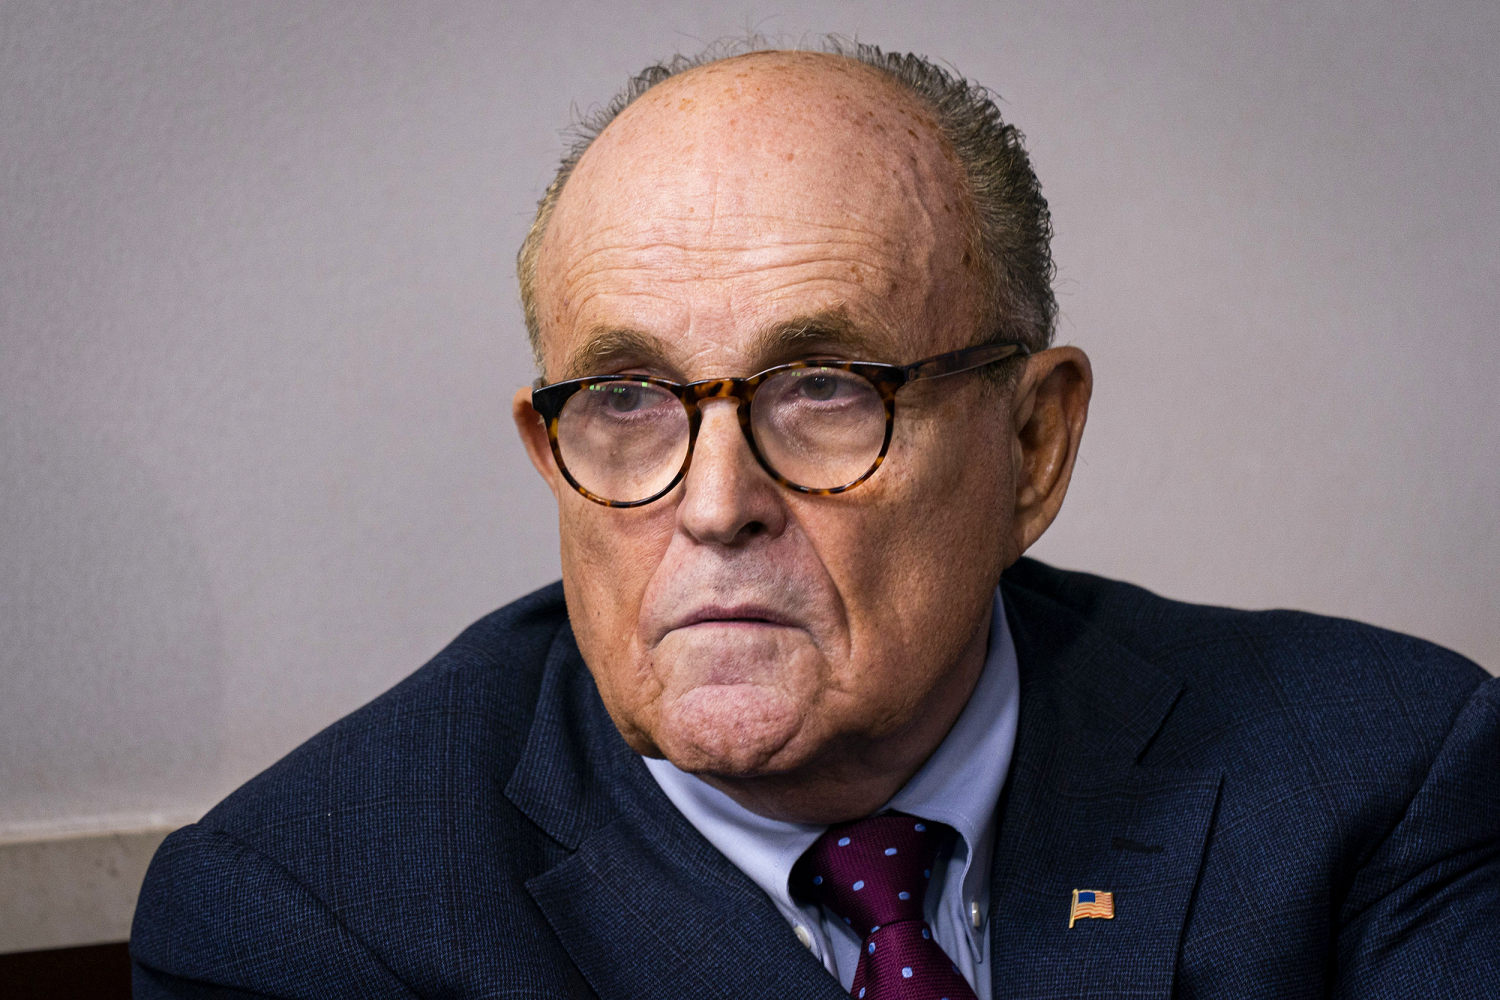 Rudy Giuliani officially disbarred in New York